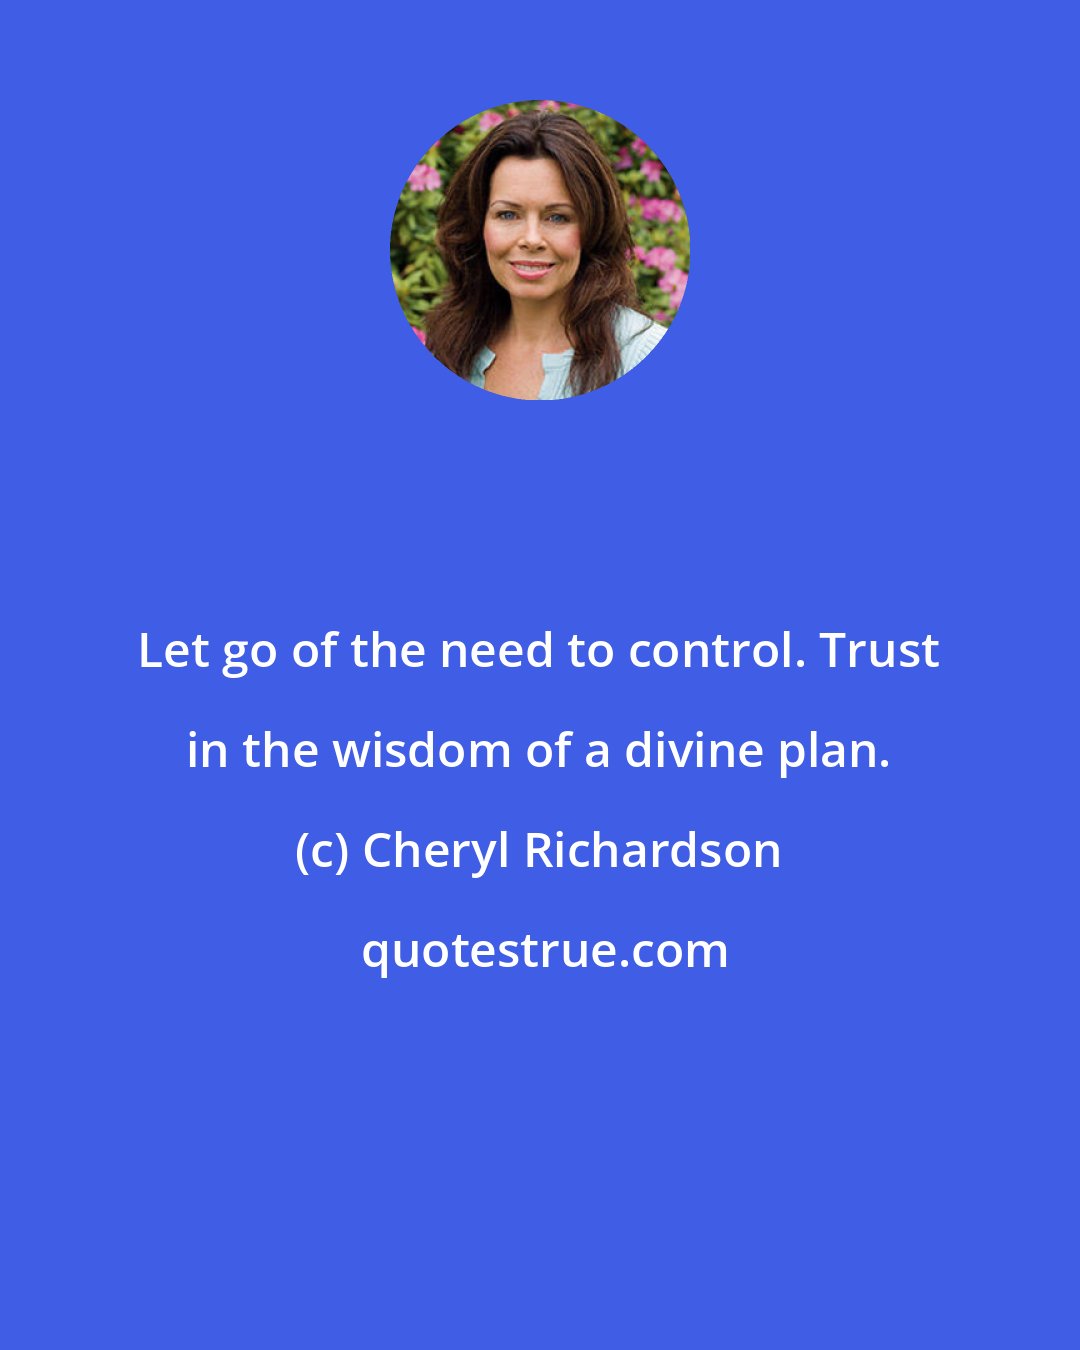 Cheryl Richardson: Let go of the need to control. Trust in the wisdom of a divine plan.